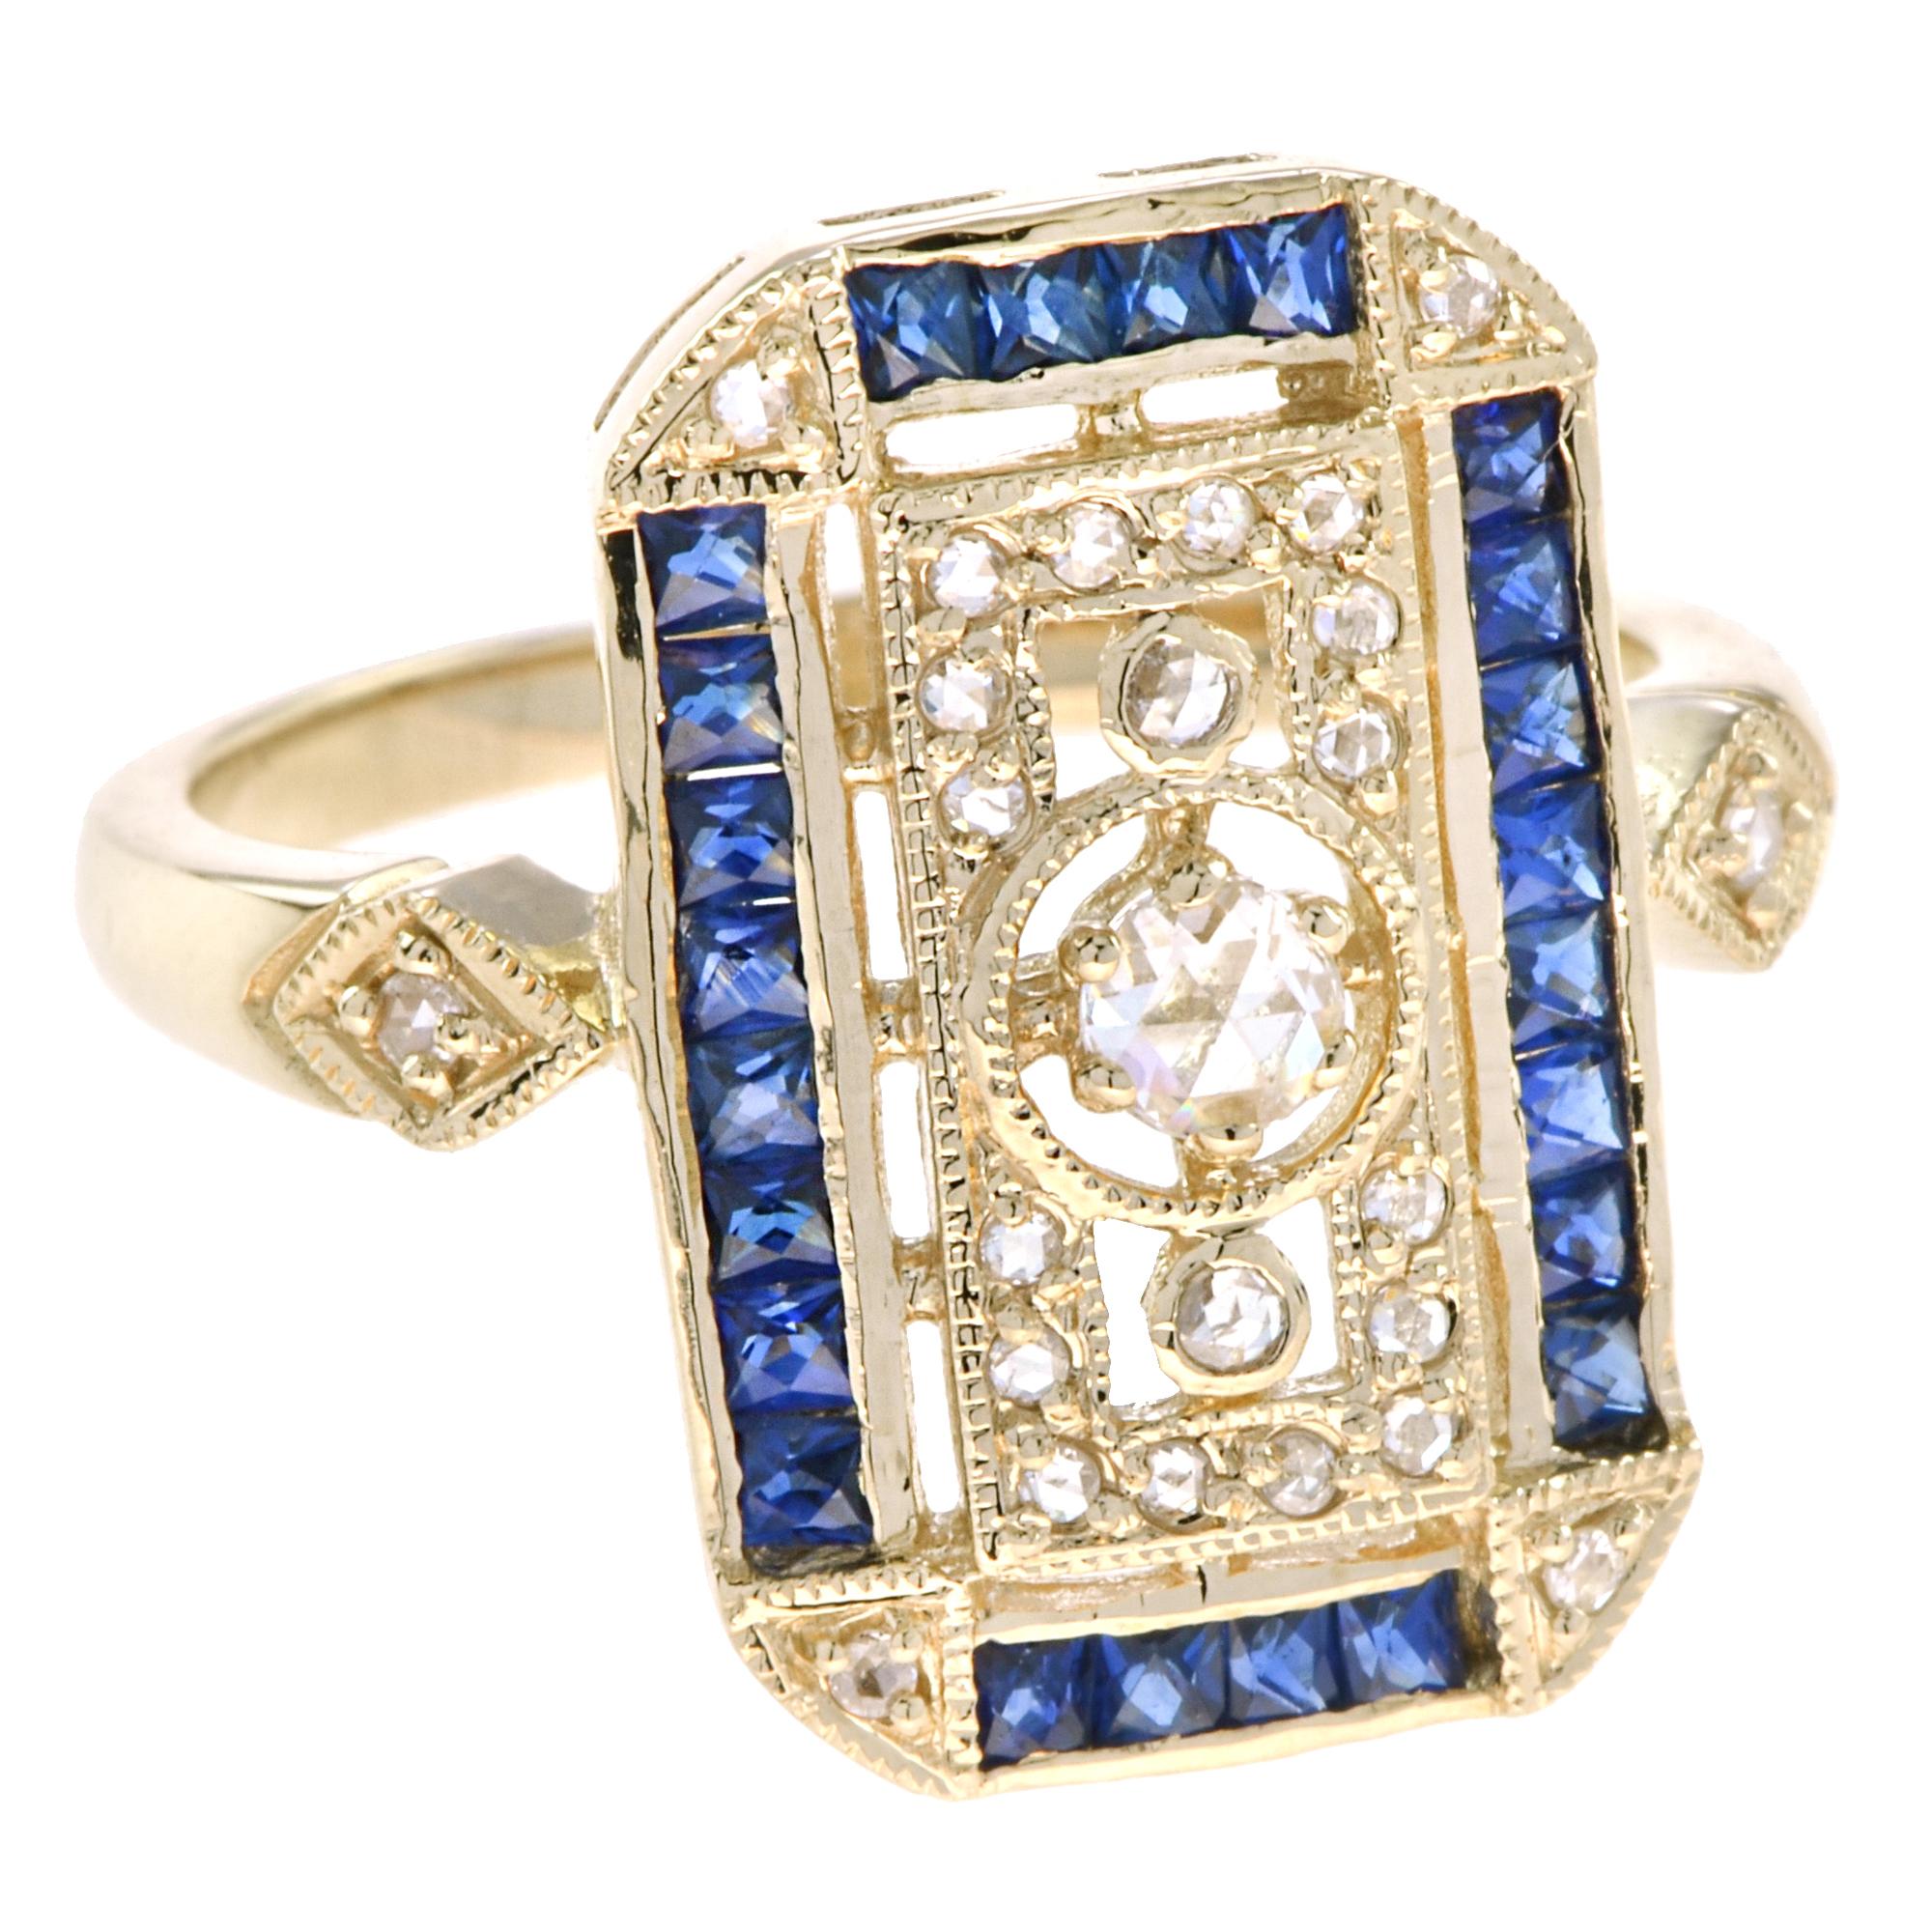 For Sale:  Old Cut Diamond and Sapphire Antique Style Filigree Ring in 14K Yellow Gold 2